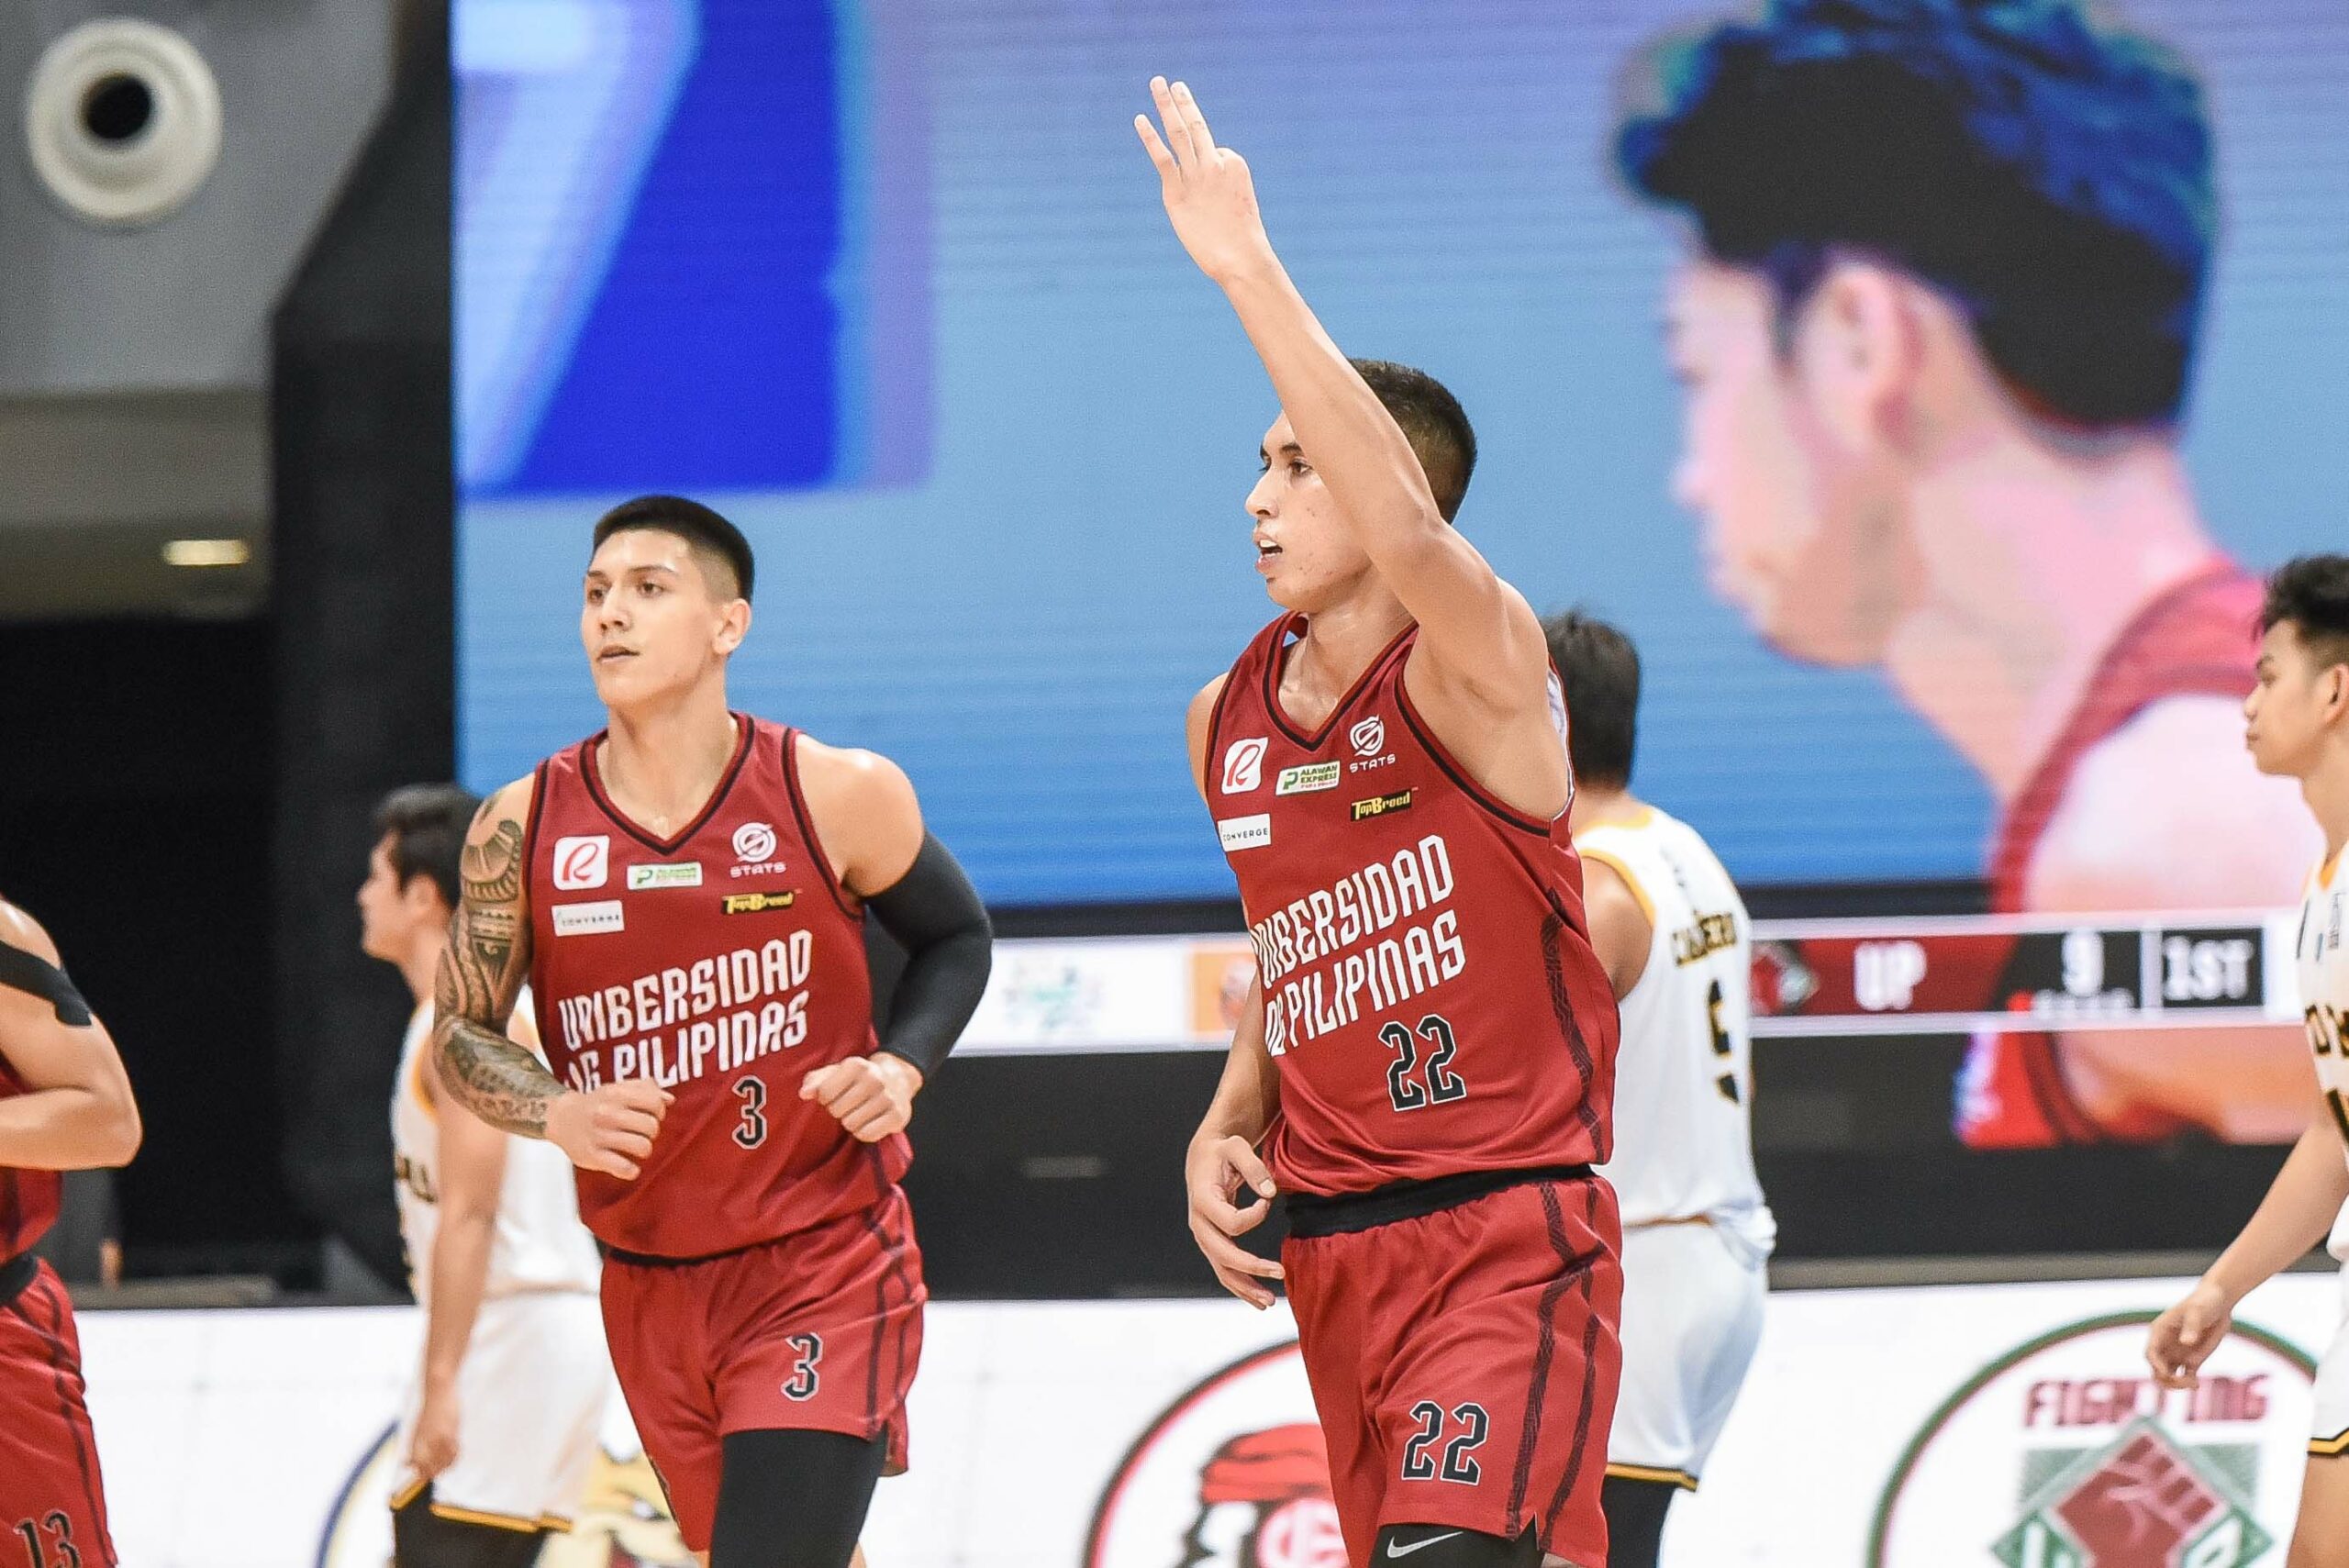 UAAP 84 UP thrashes UST by 29 in prep for Ateneo showdown